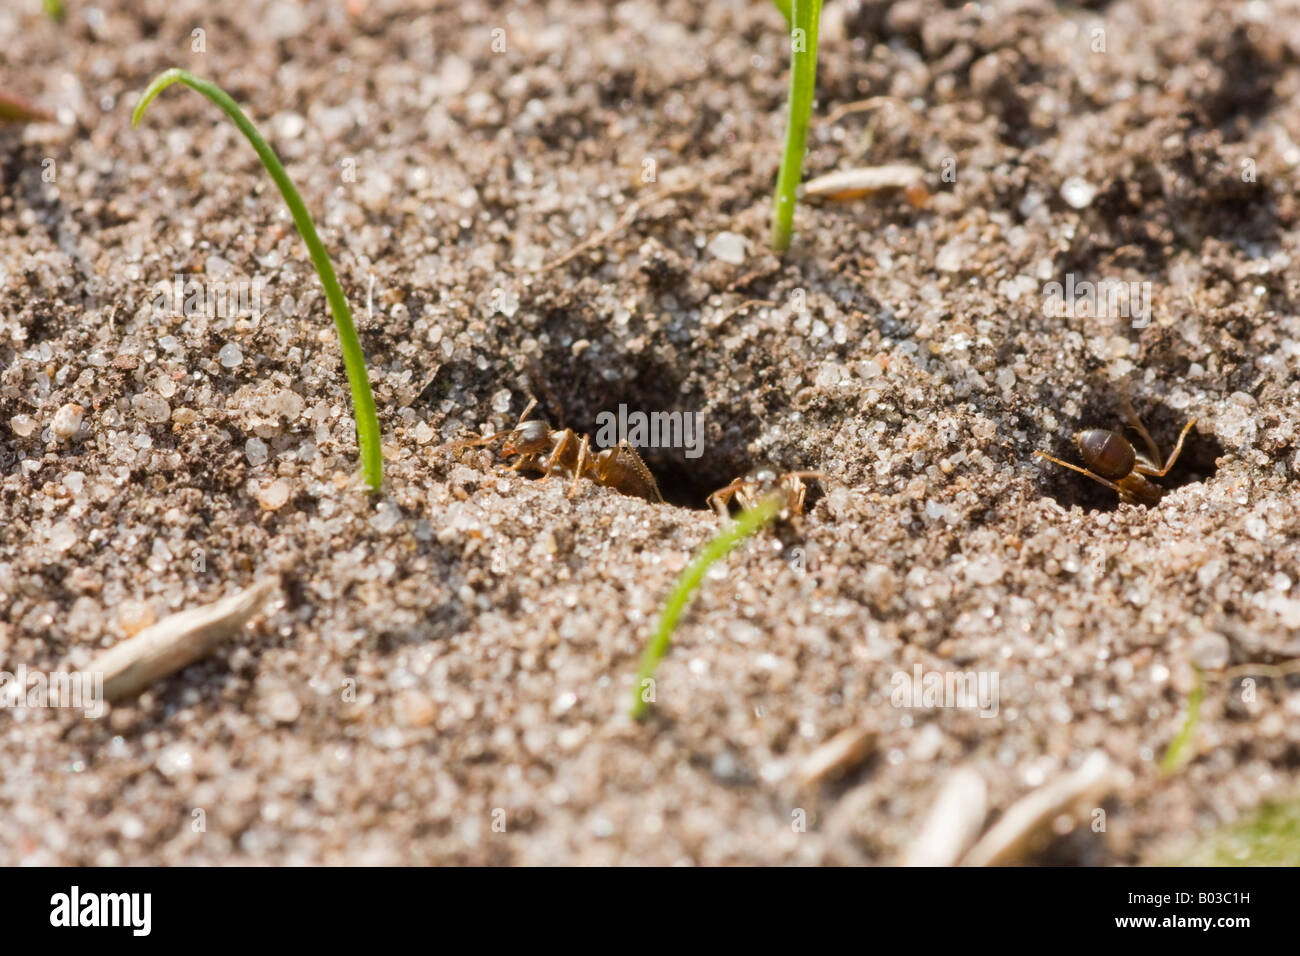 Ants emerging from an underground ants nest Stock Photo